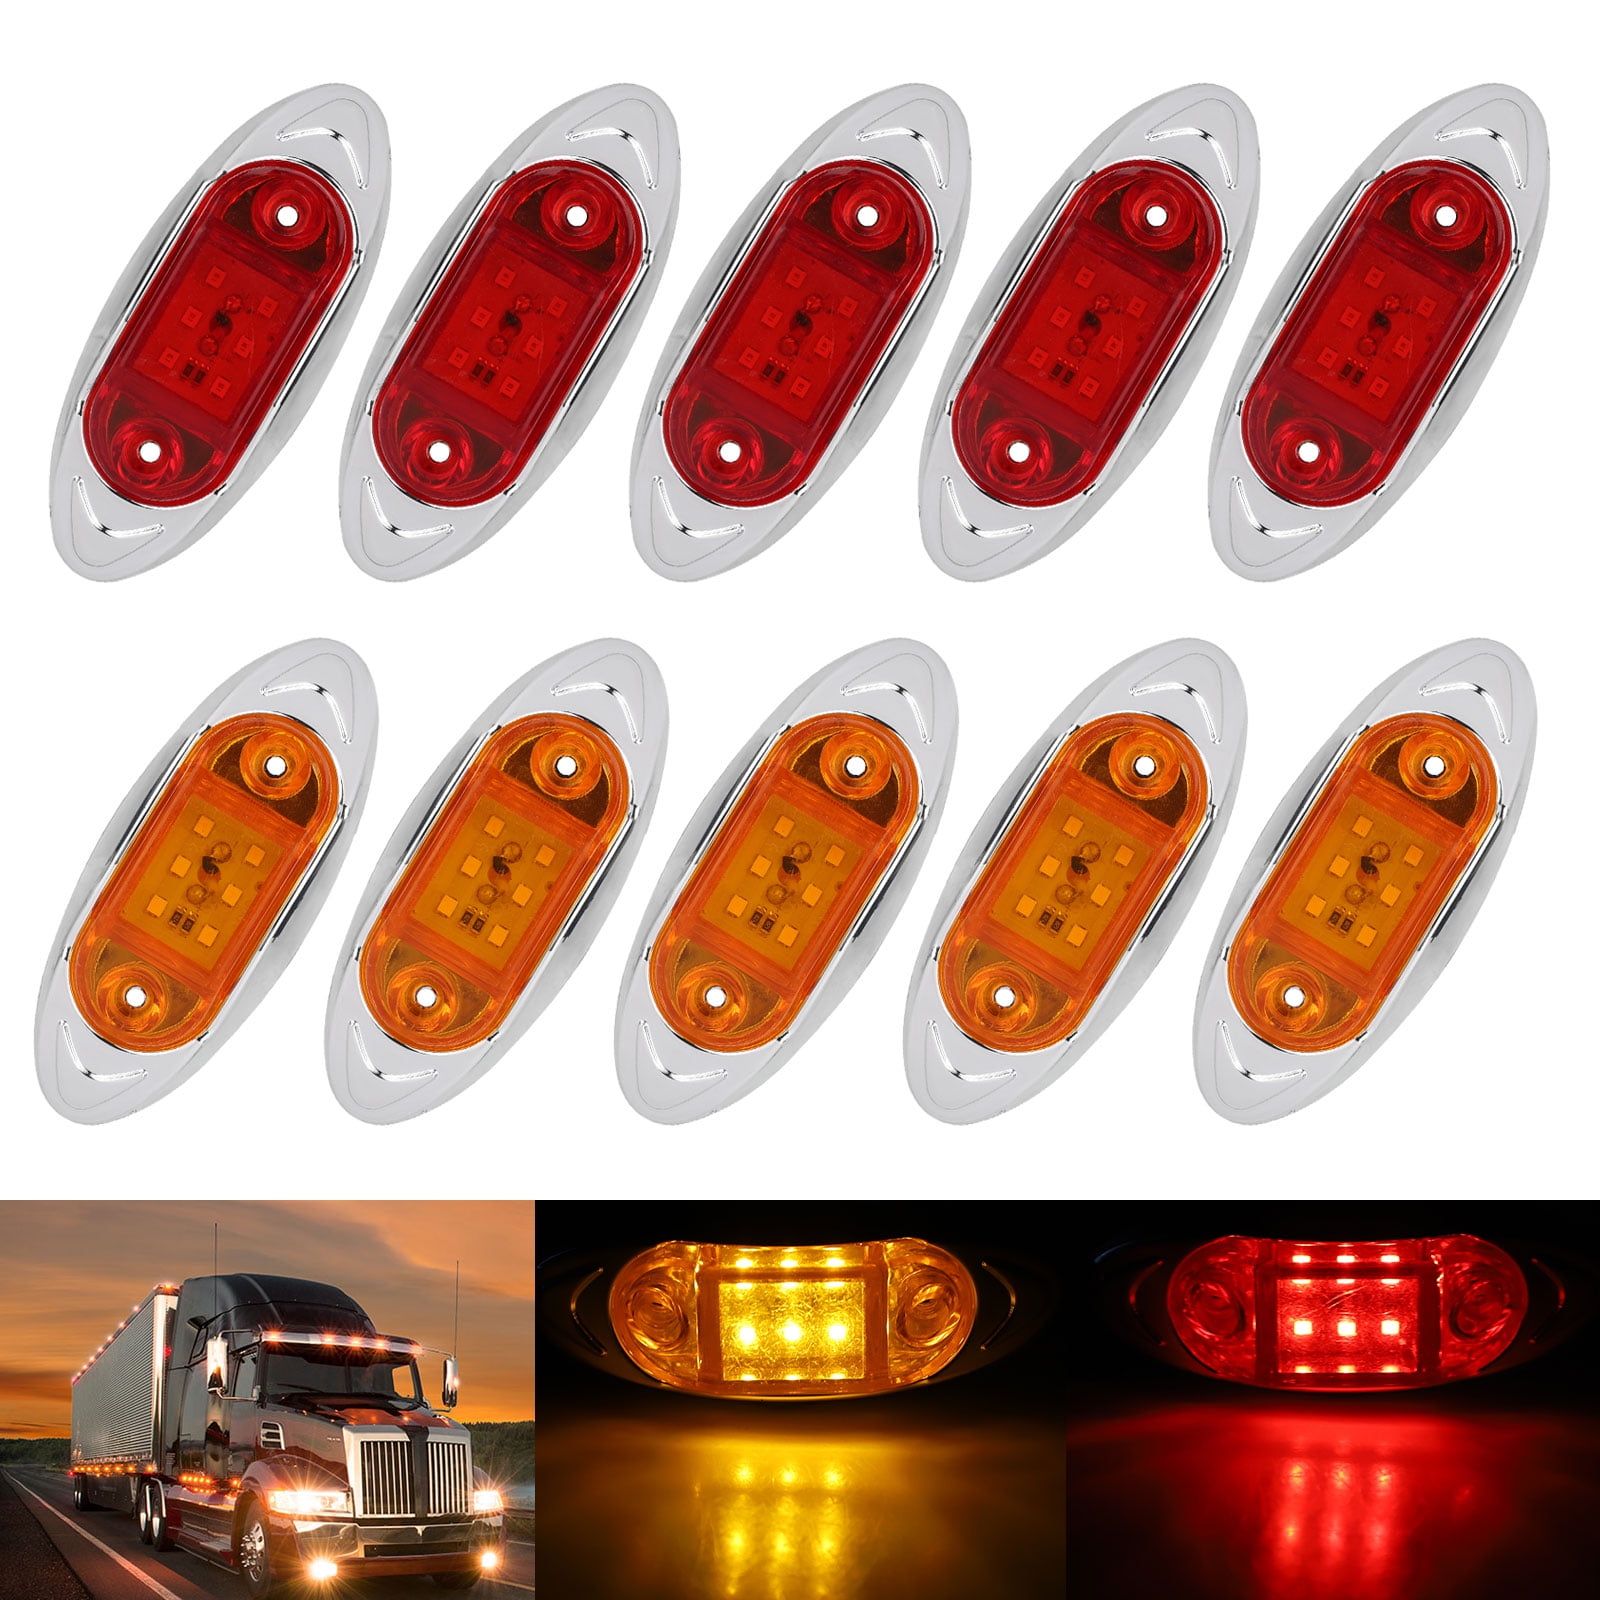 4X White Front Side 20 LED Marker Lights Oval Neon Trailer Truck Lorry Bus 24V 